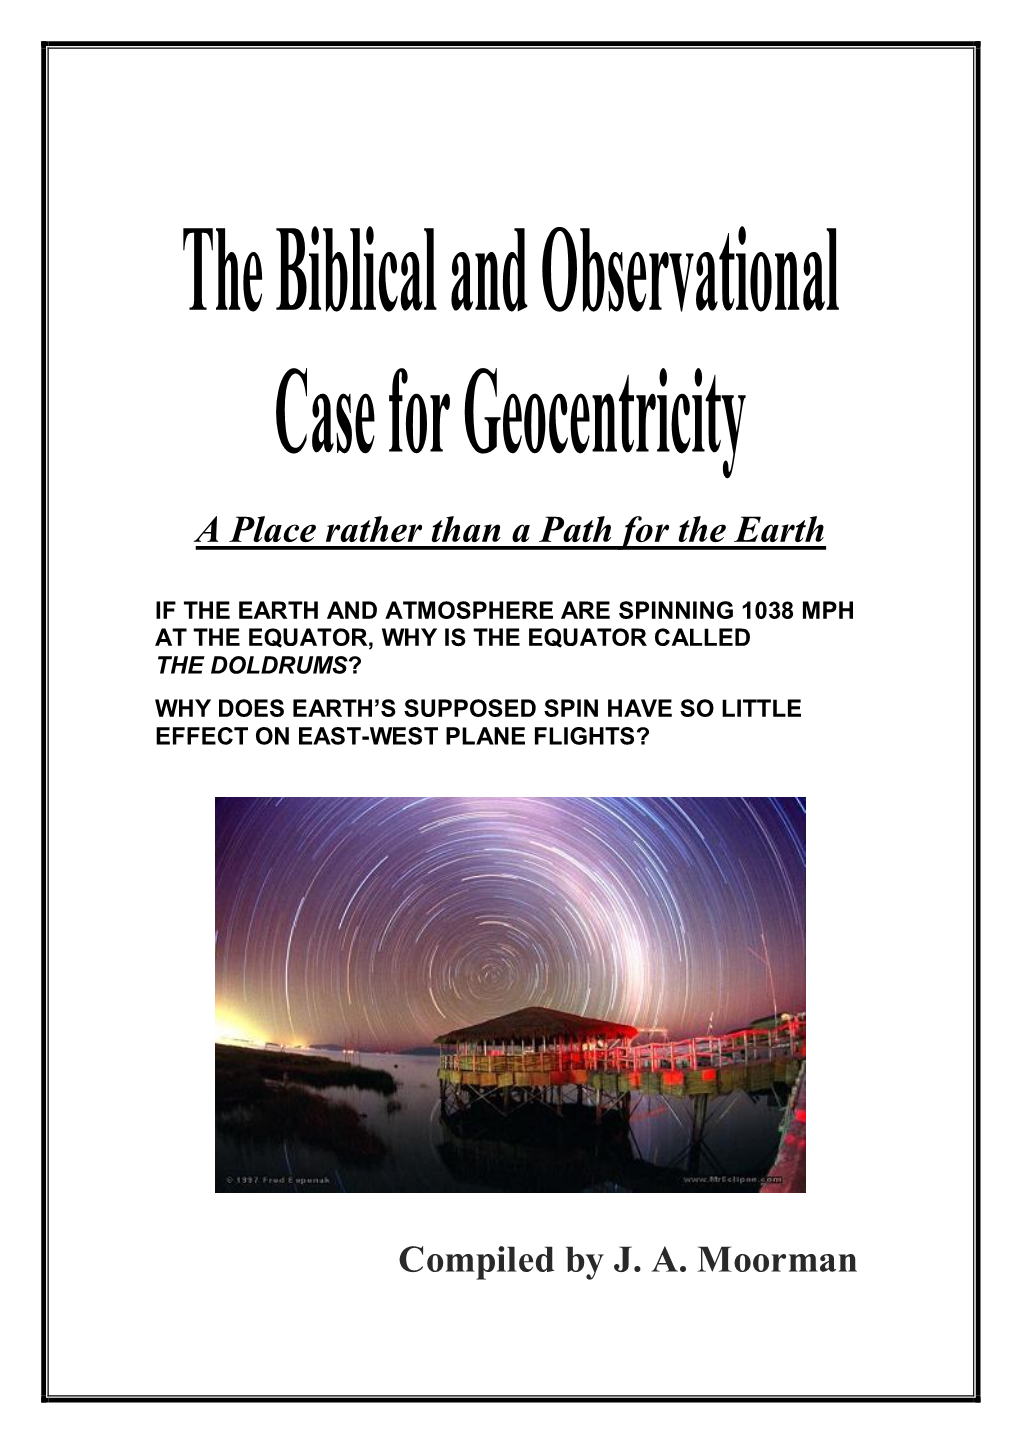 15. the Biblical and Observational Case for Geocentricity